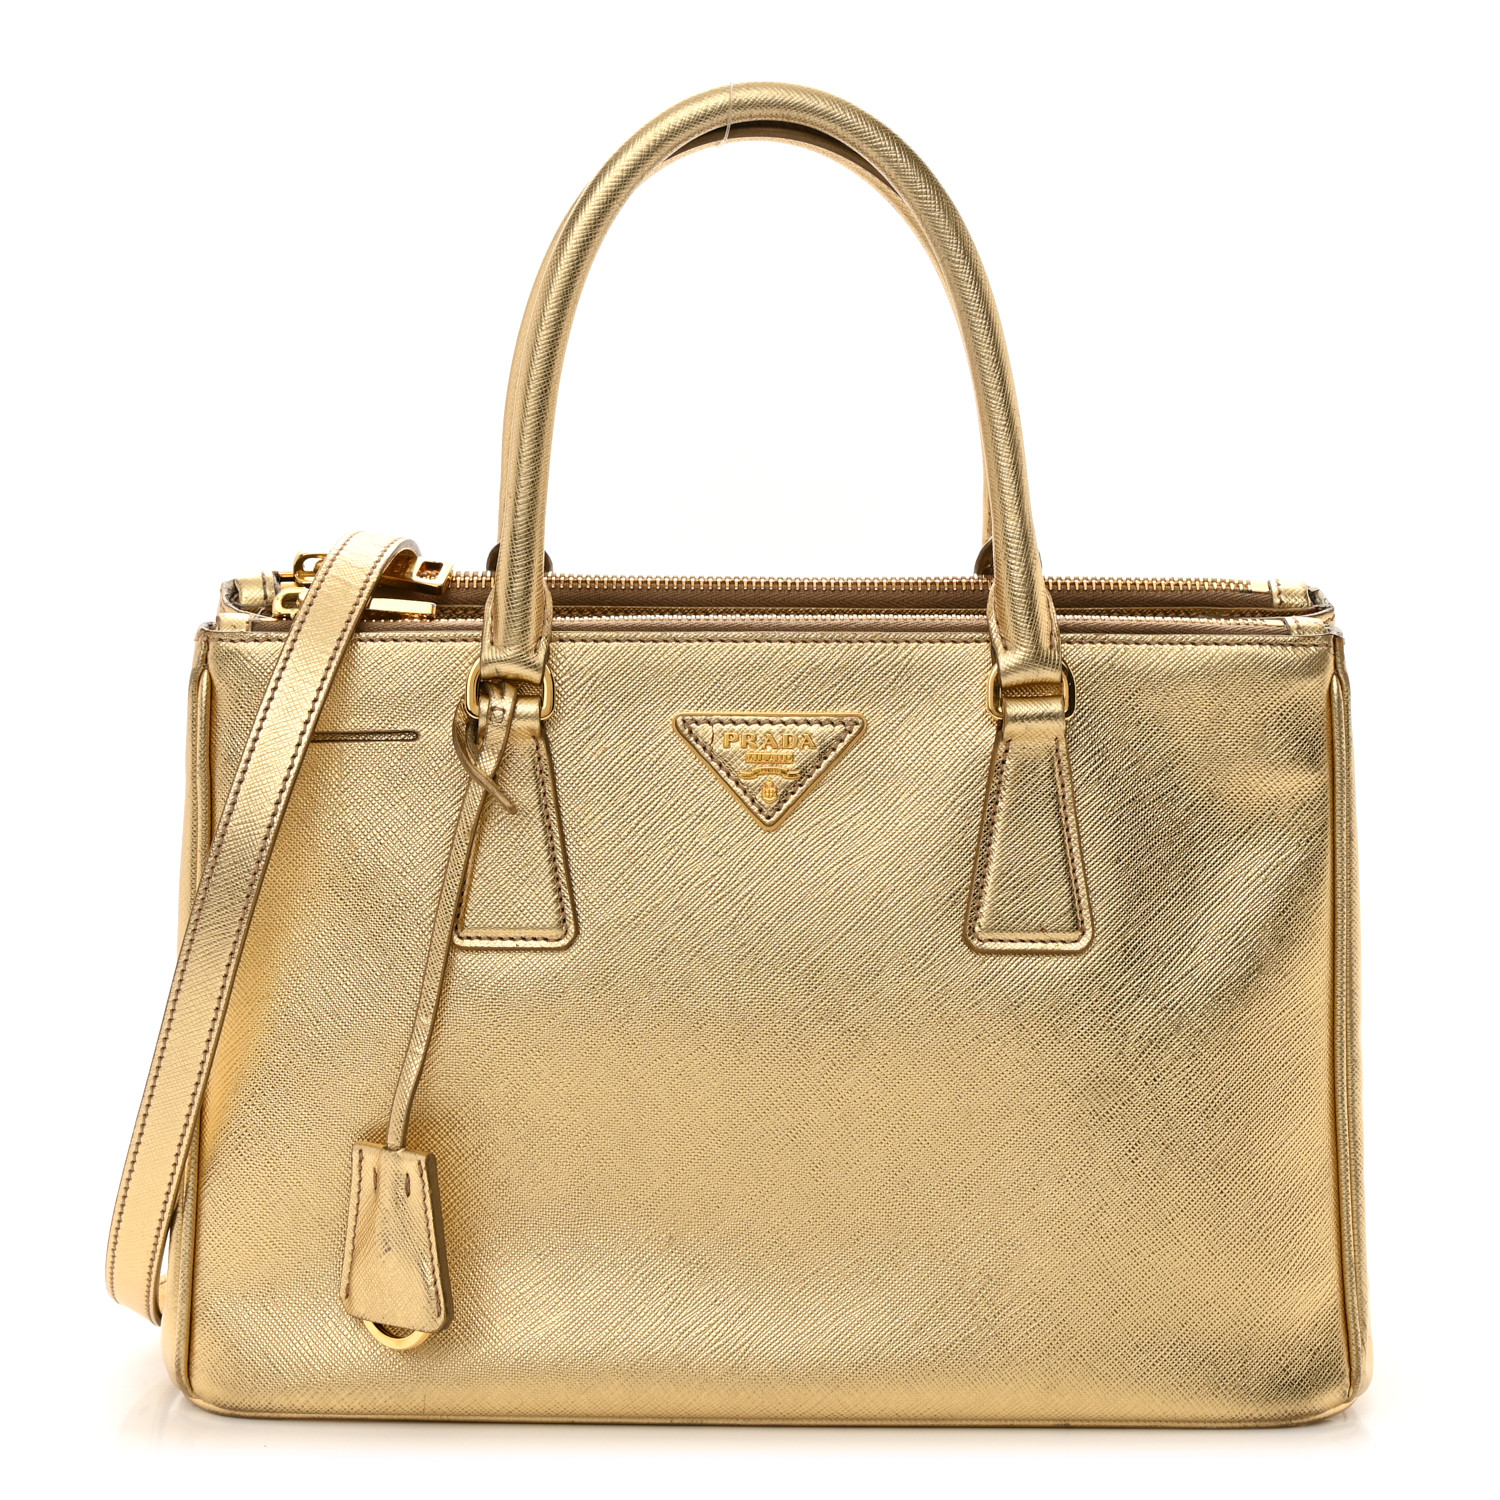 front view image of a PRADA Metallic Saffiano Small Galleria Double Zip Tote in the color gold Platino by FASHIONPHILE